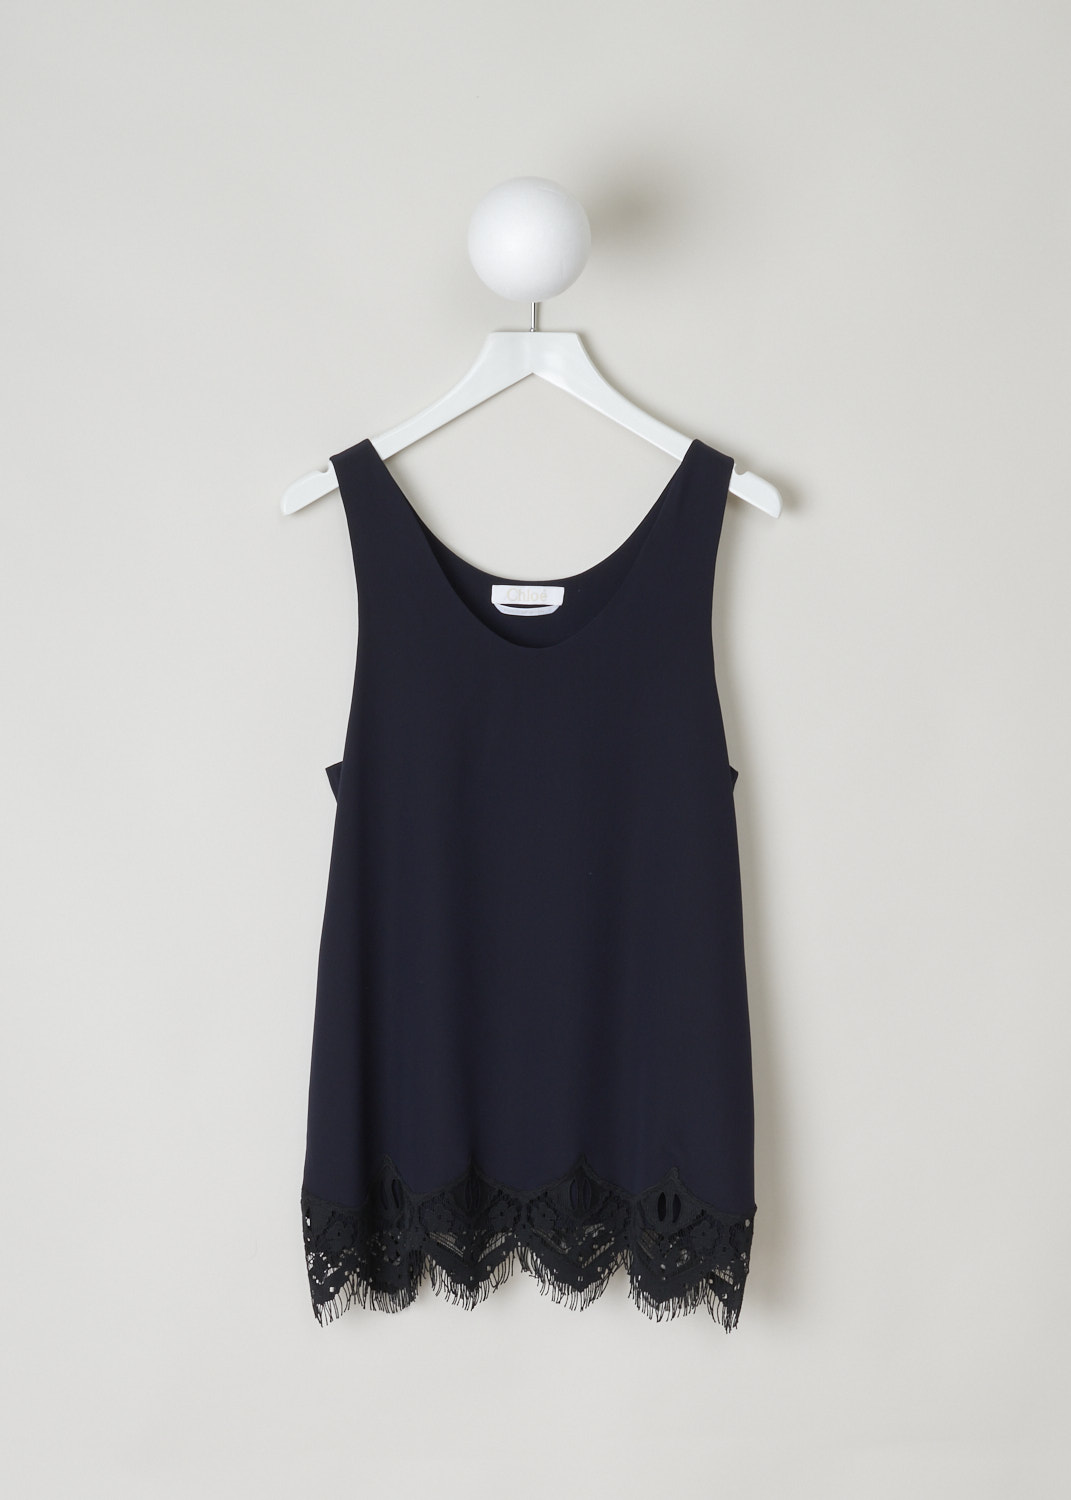 ChloÃ©, Navy tank-top with black lace detailing, 16EHT92_16E004_7V1_navy_black, blue, front, A lovely basic being this navy tank-top. Featuring a scoop neckline, and has a lace decorated hem. 